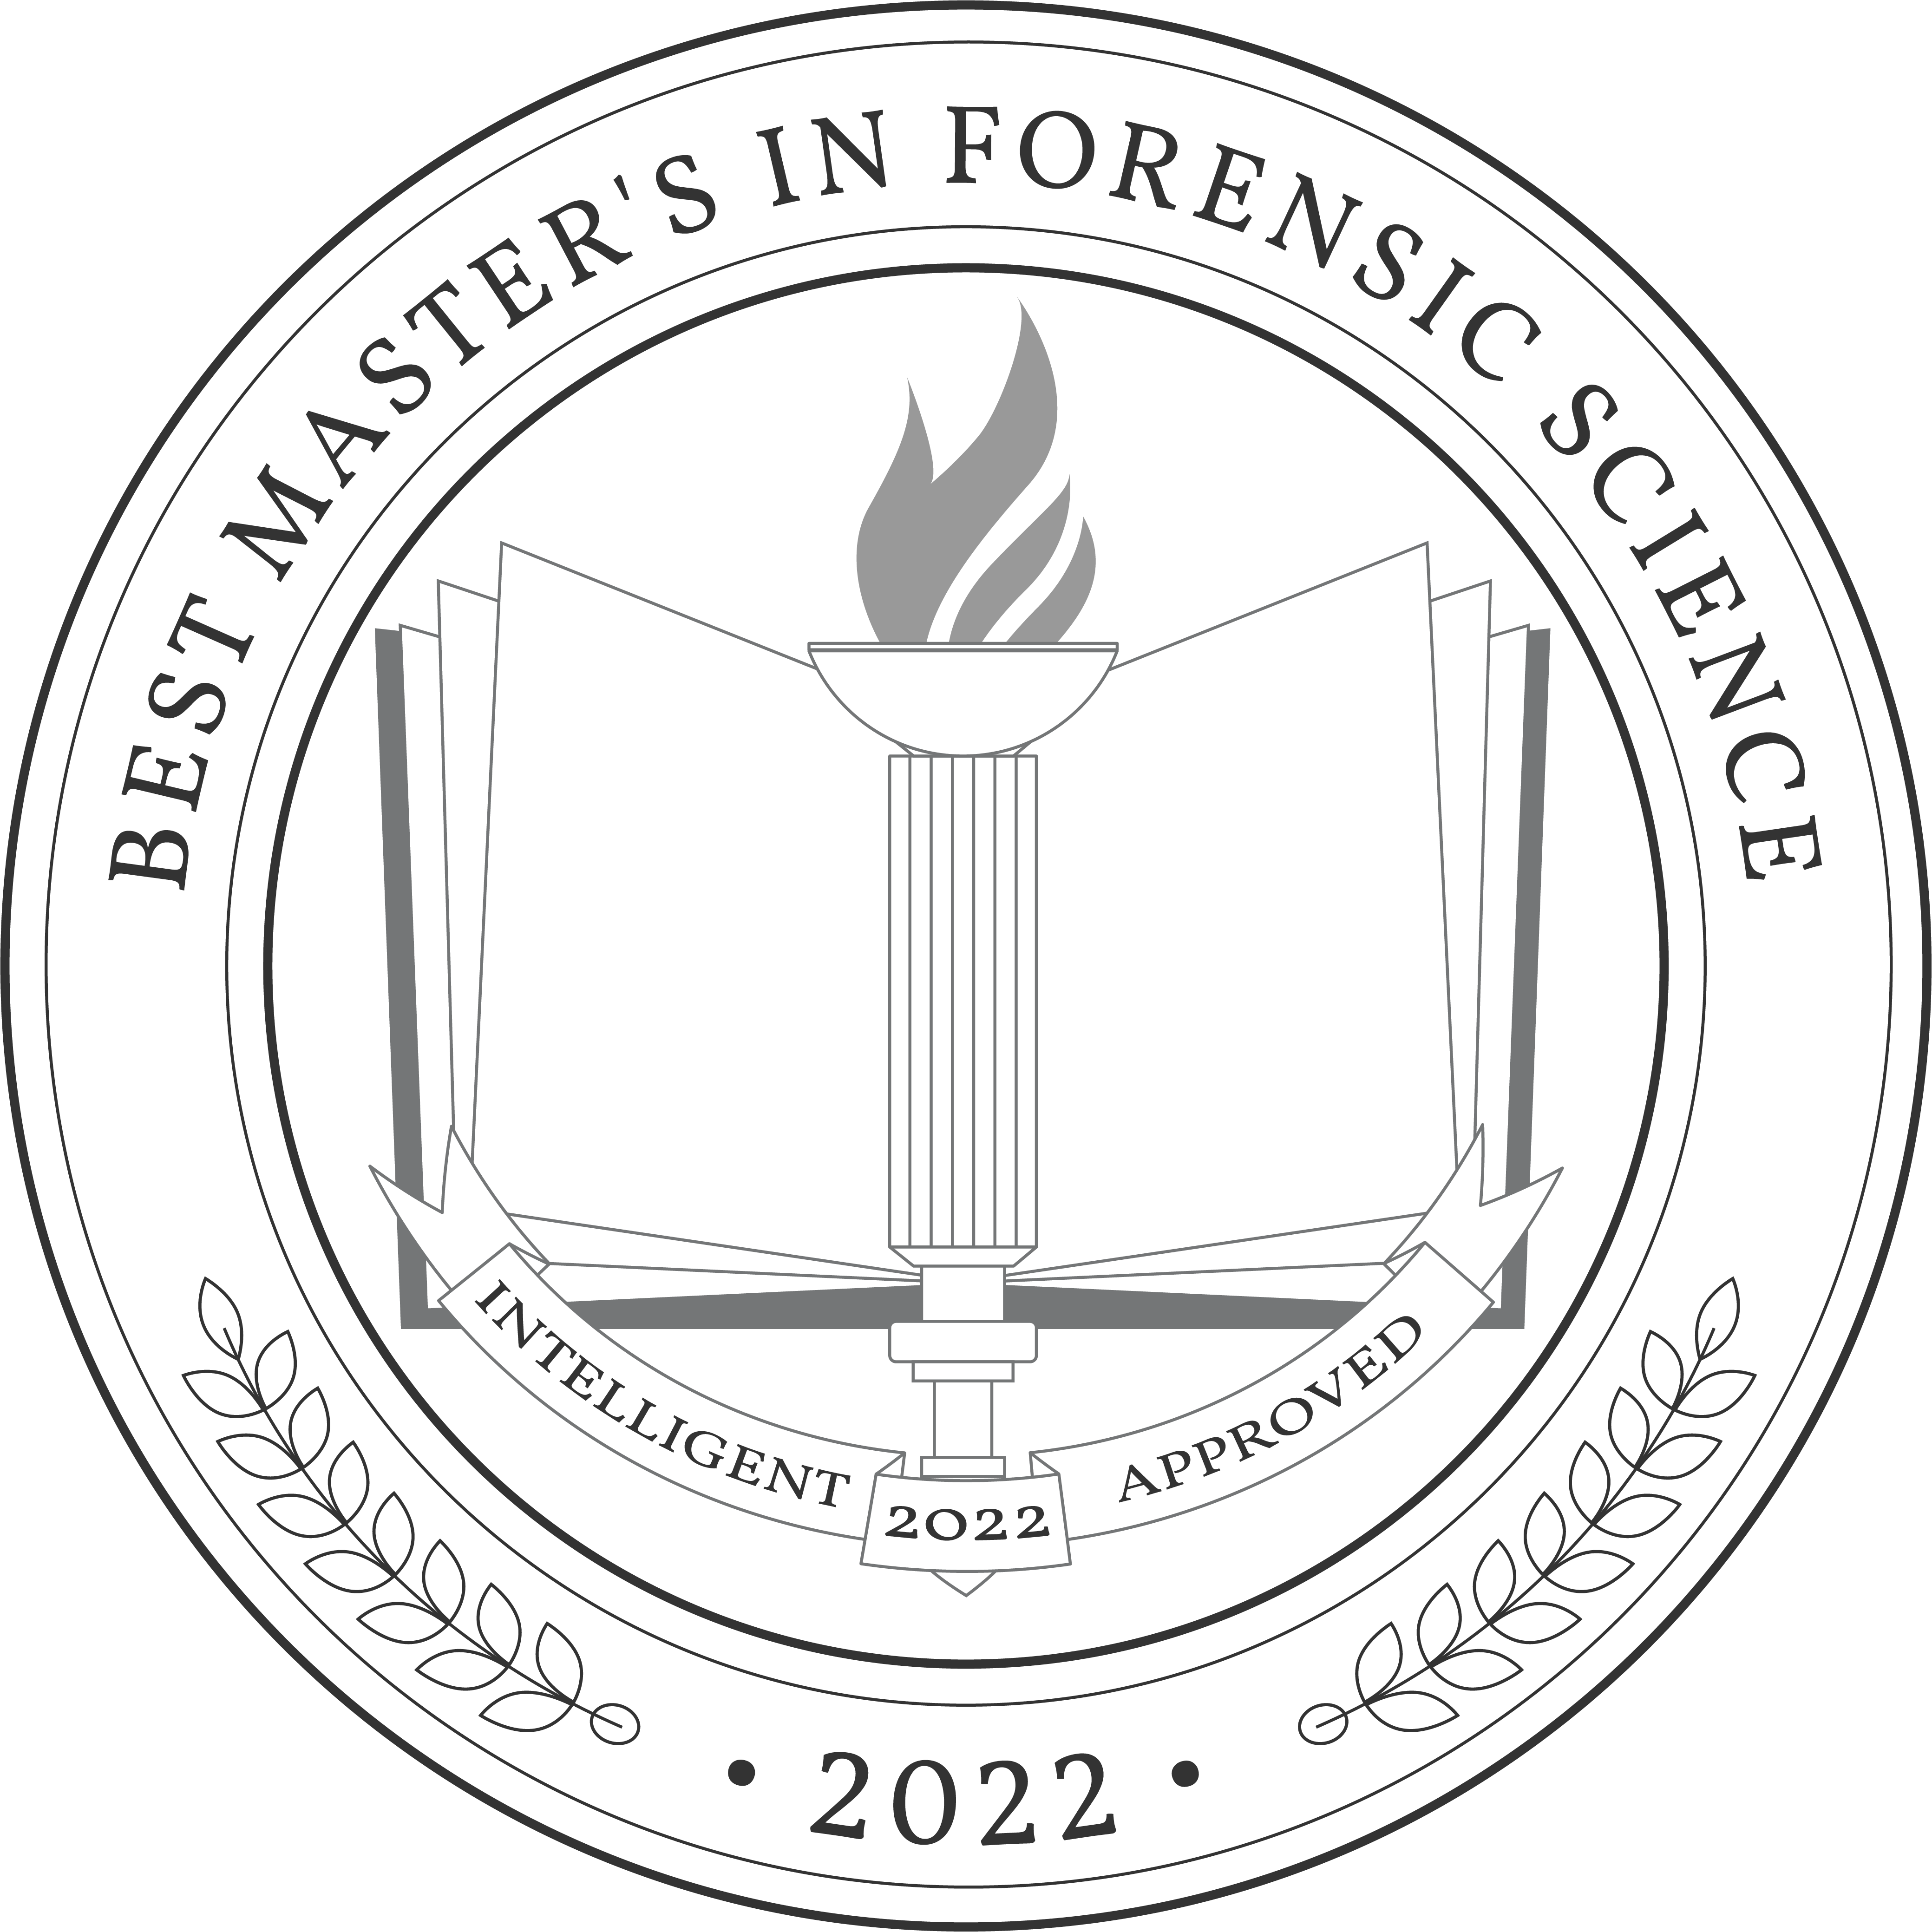 Best Master's in Forensic Science Degree Programs